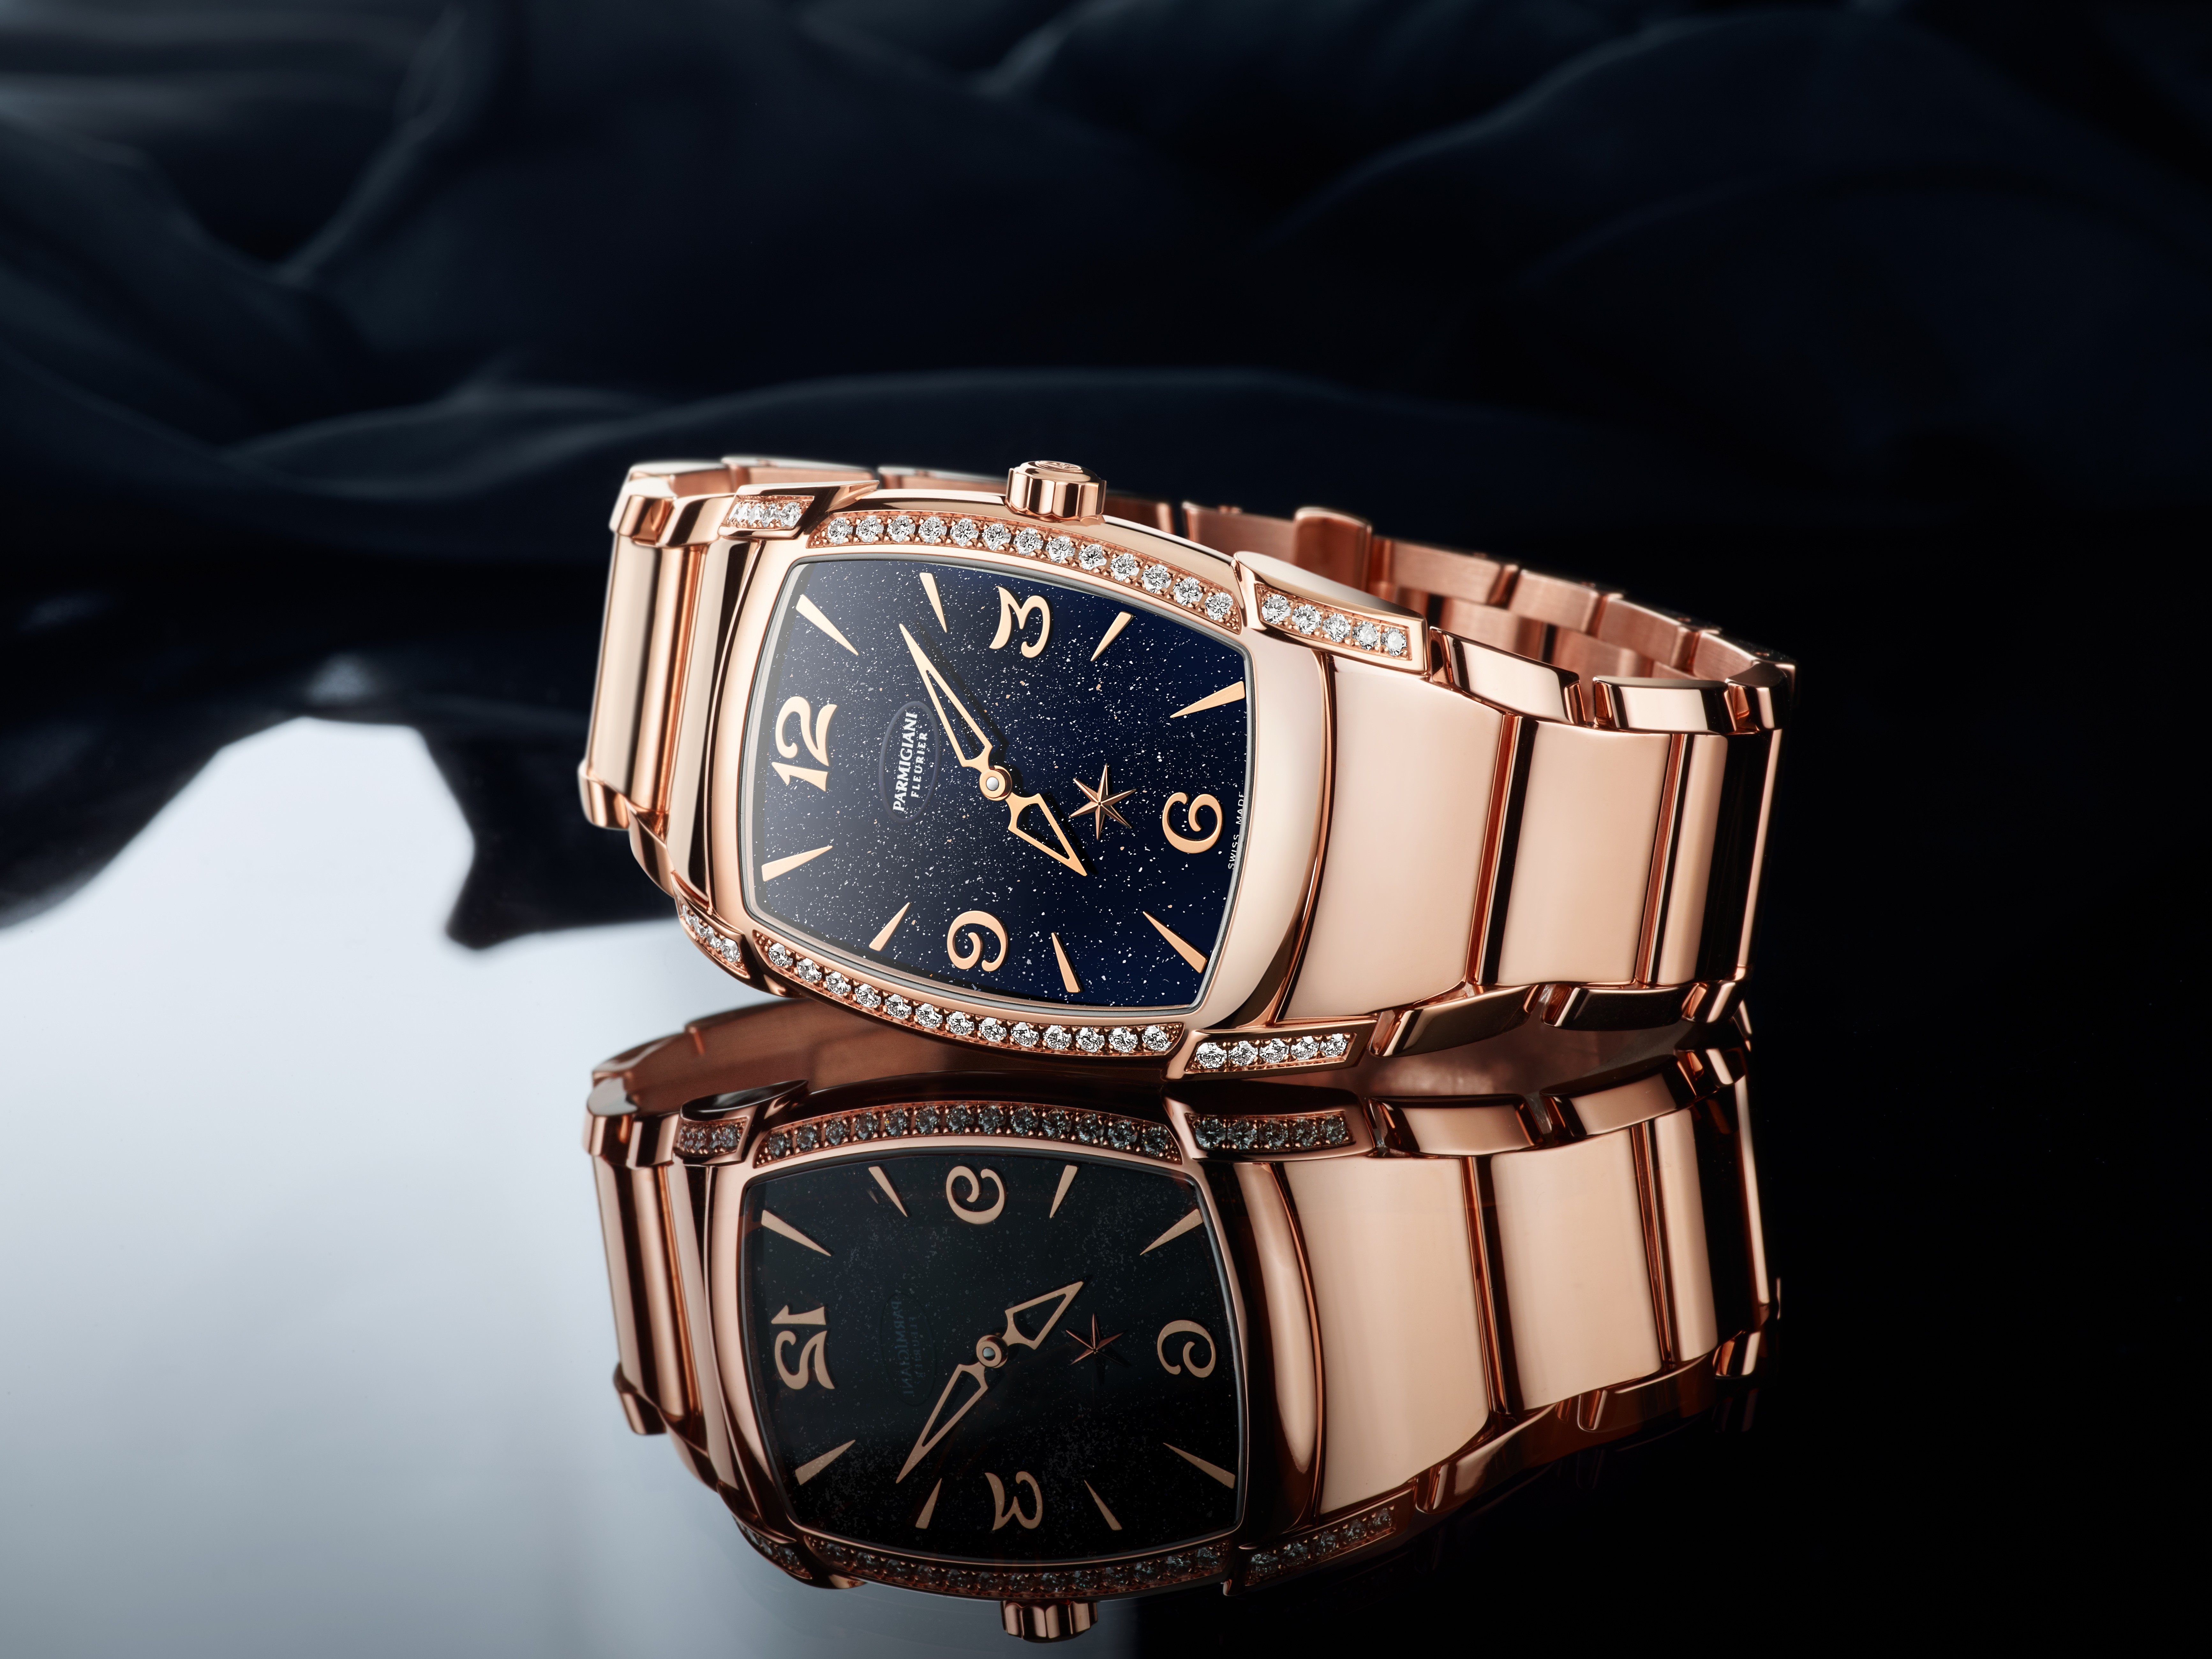 Parmigiani Fleurier celebrates the 10th anniversary of Kalparisma, its first mechanical watch collection for women, in 2018 with Kalparisma Nova Galaxy. 